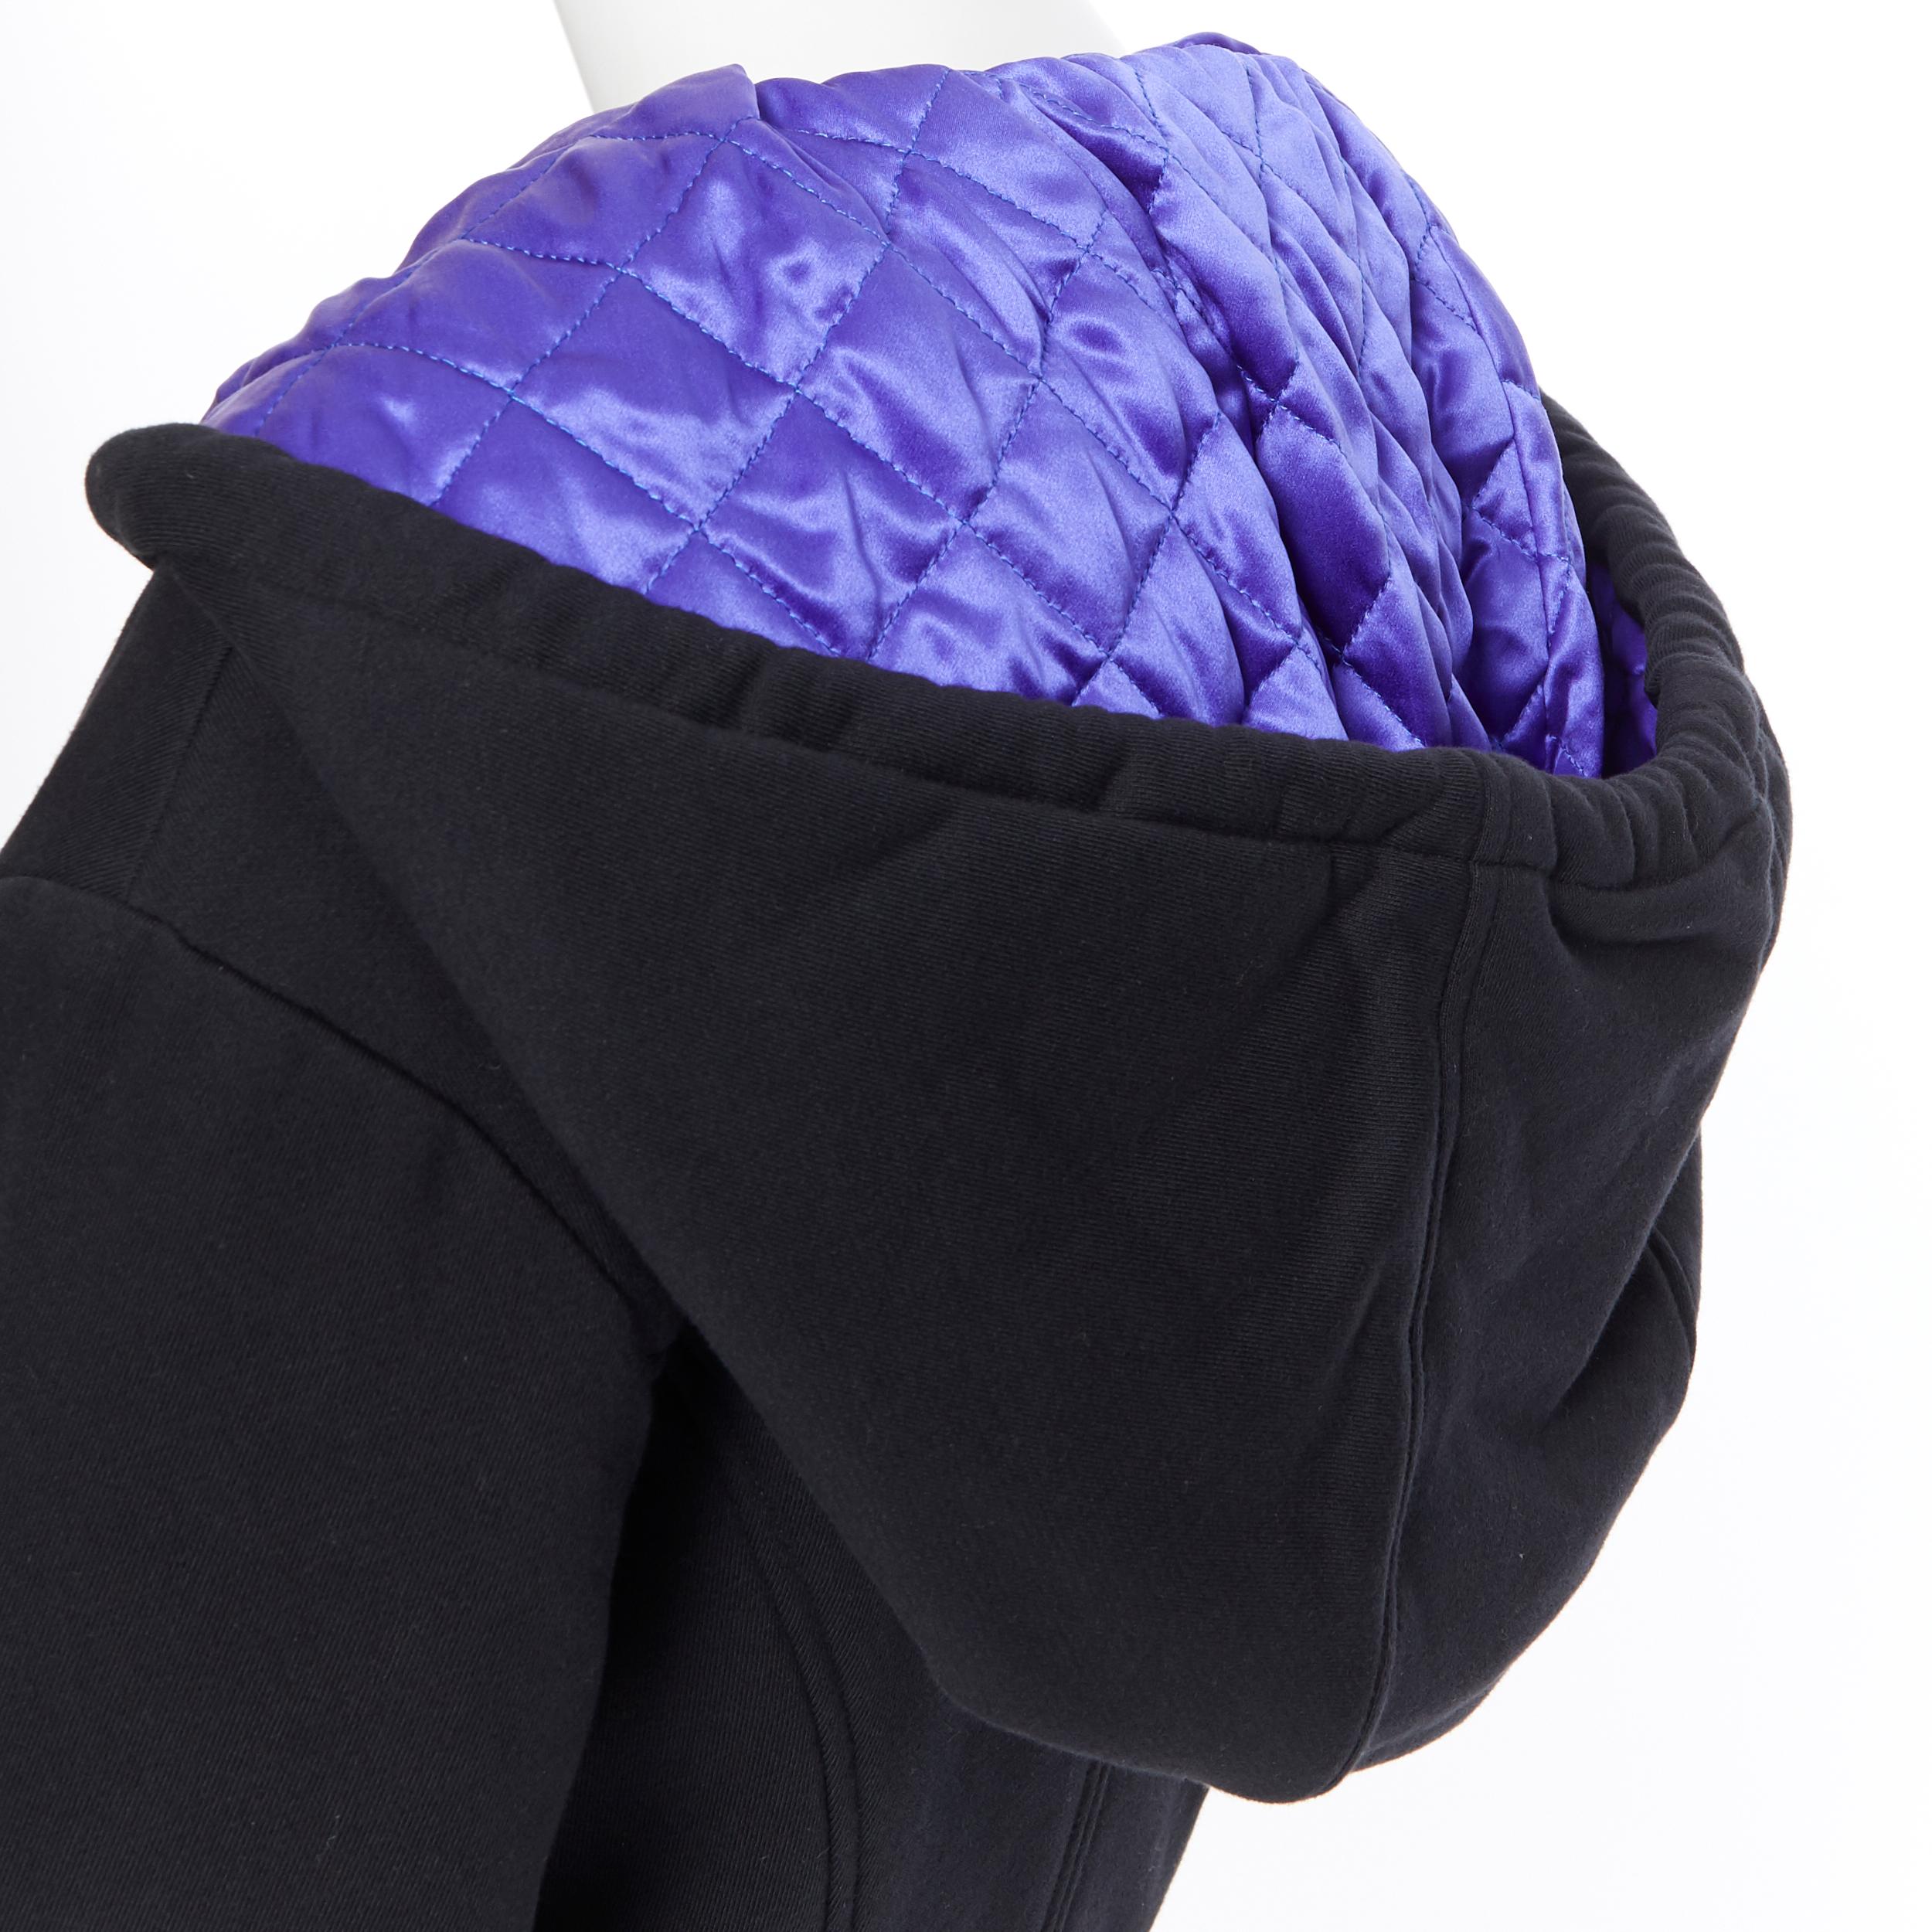 new VERSACE AW18 Pillow Talk black 90s box logo purple quilted cropped hoodie XS
Brand: Versace
Designer: Donatella Versace
Collection: Fall Winter 2018
Model Name / Style: Pillow Talk hoodie
Material: Cotton
Color: Black, royal purple